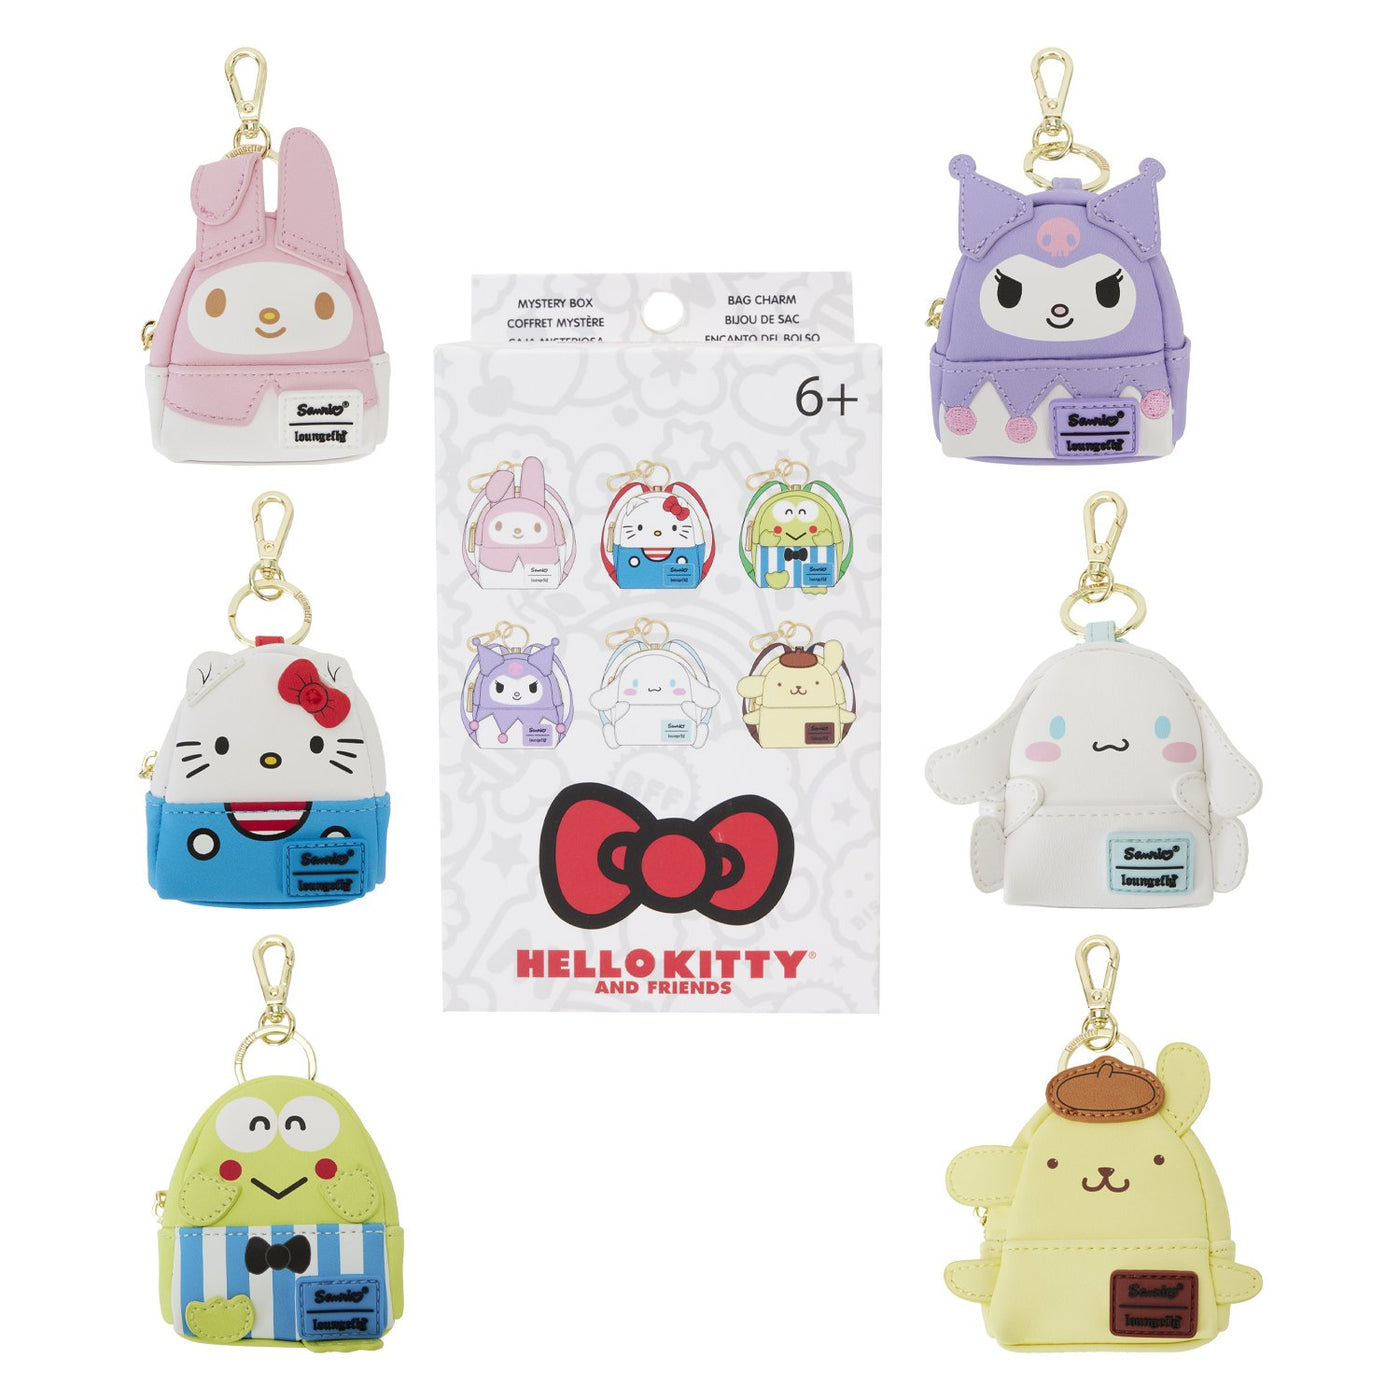 Loungefly Sanrio Hello Kitty 50th Anniversary Classic Mystery Box Mini Backpack Keychains - Packaging with Characters